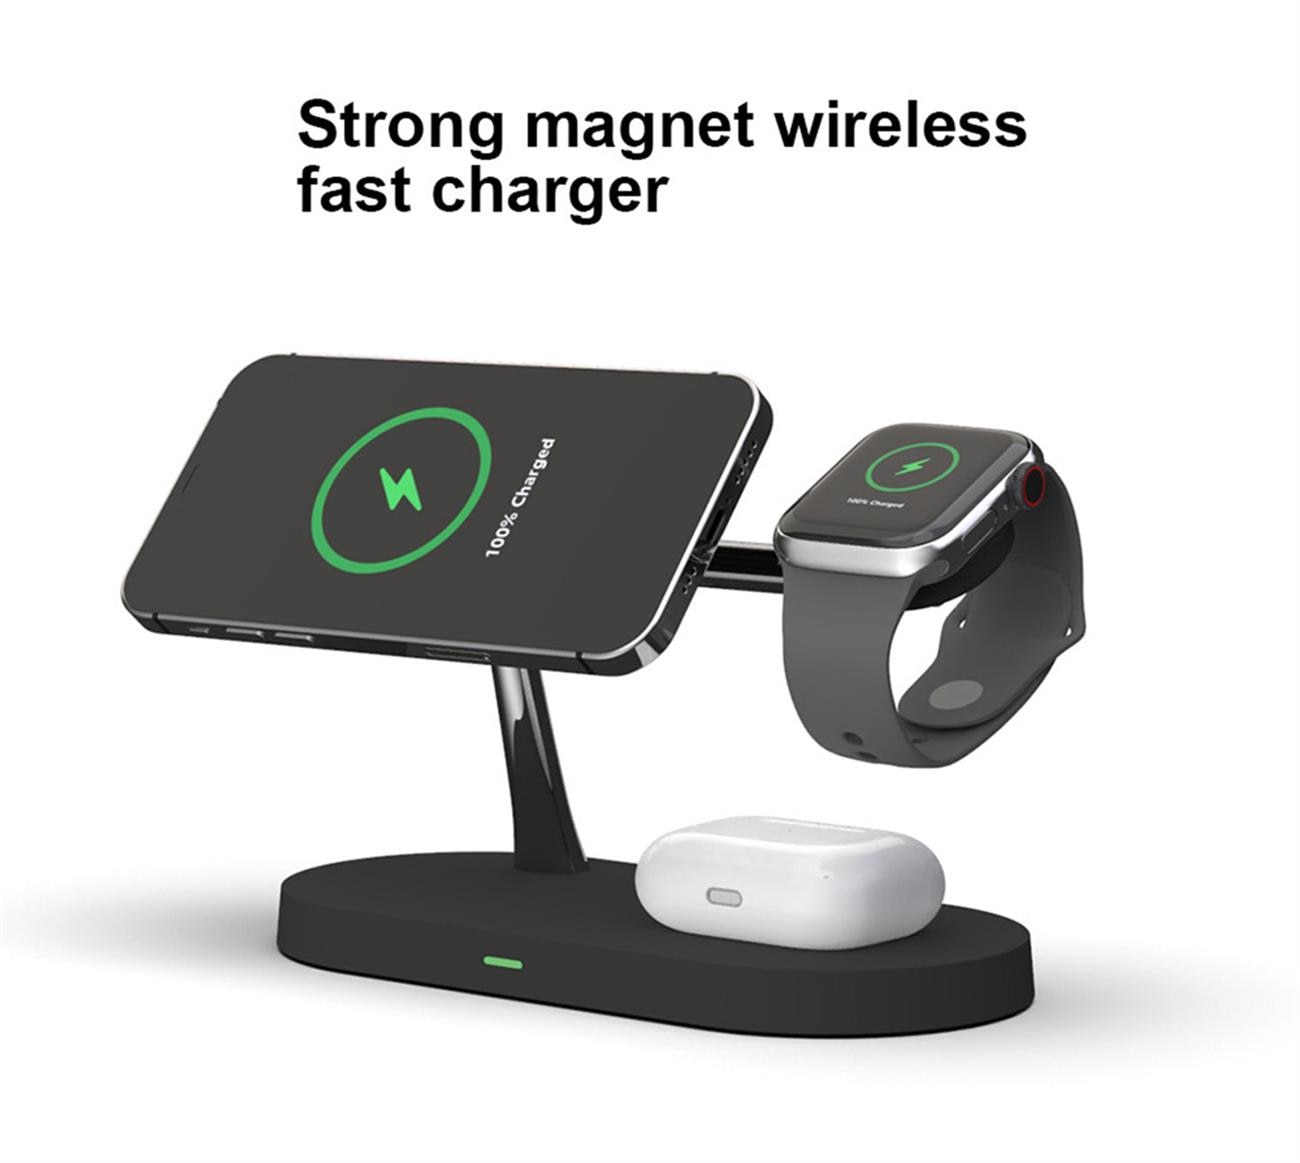 Magnetic Wireless Charger 5 In 1 Multifunction 15w Fast Charge For iPhone, iWatch, Airpod